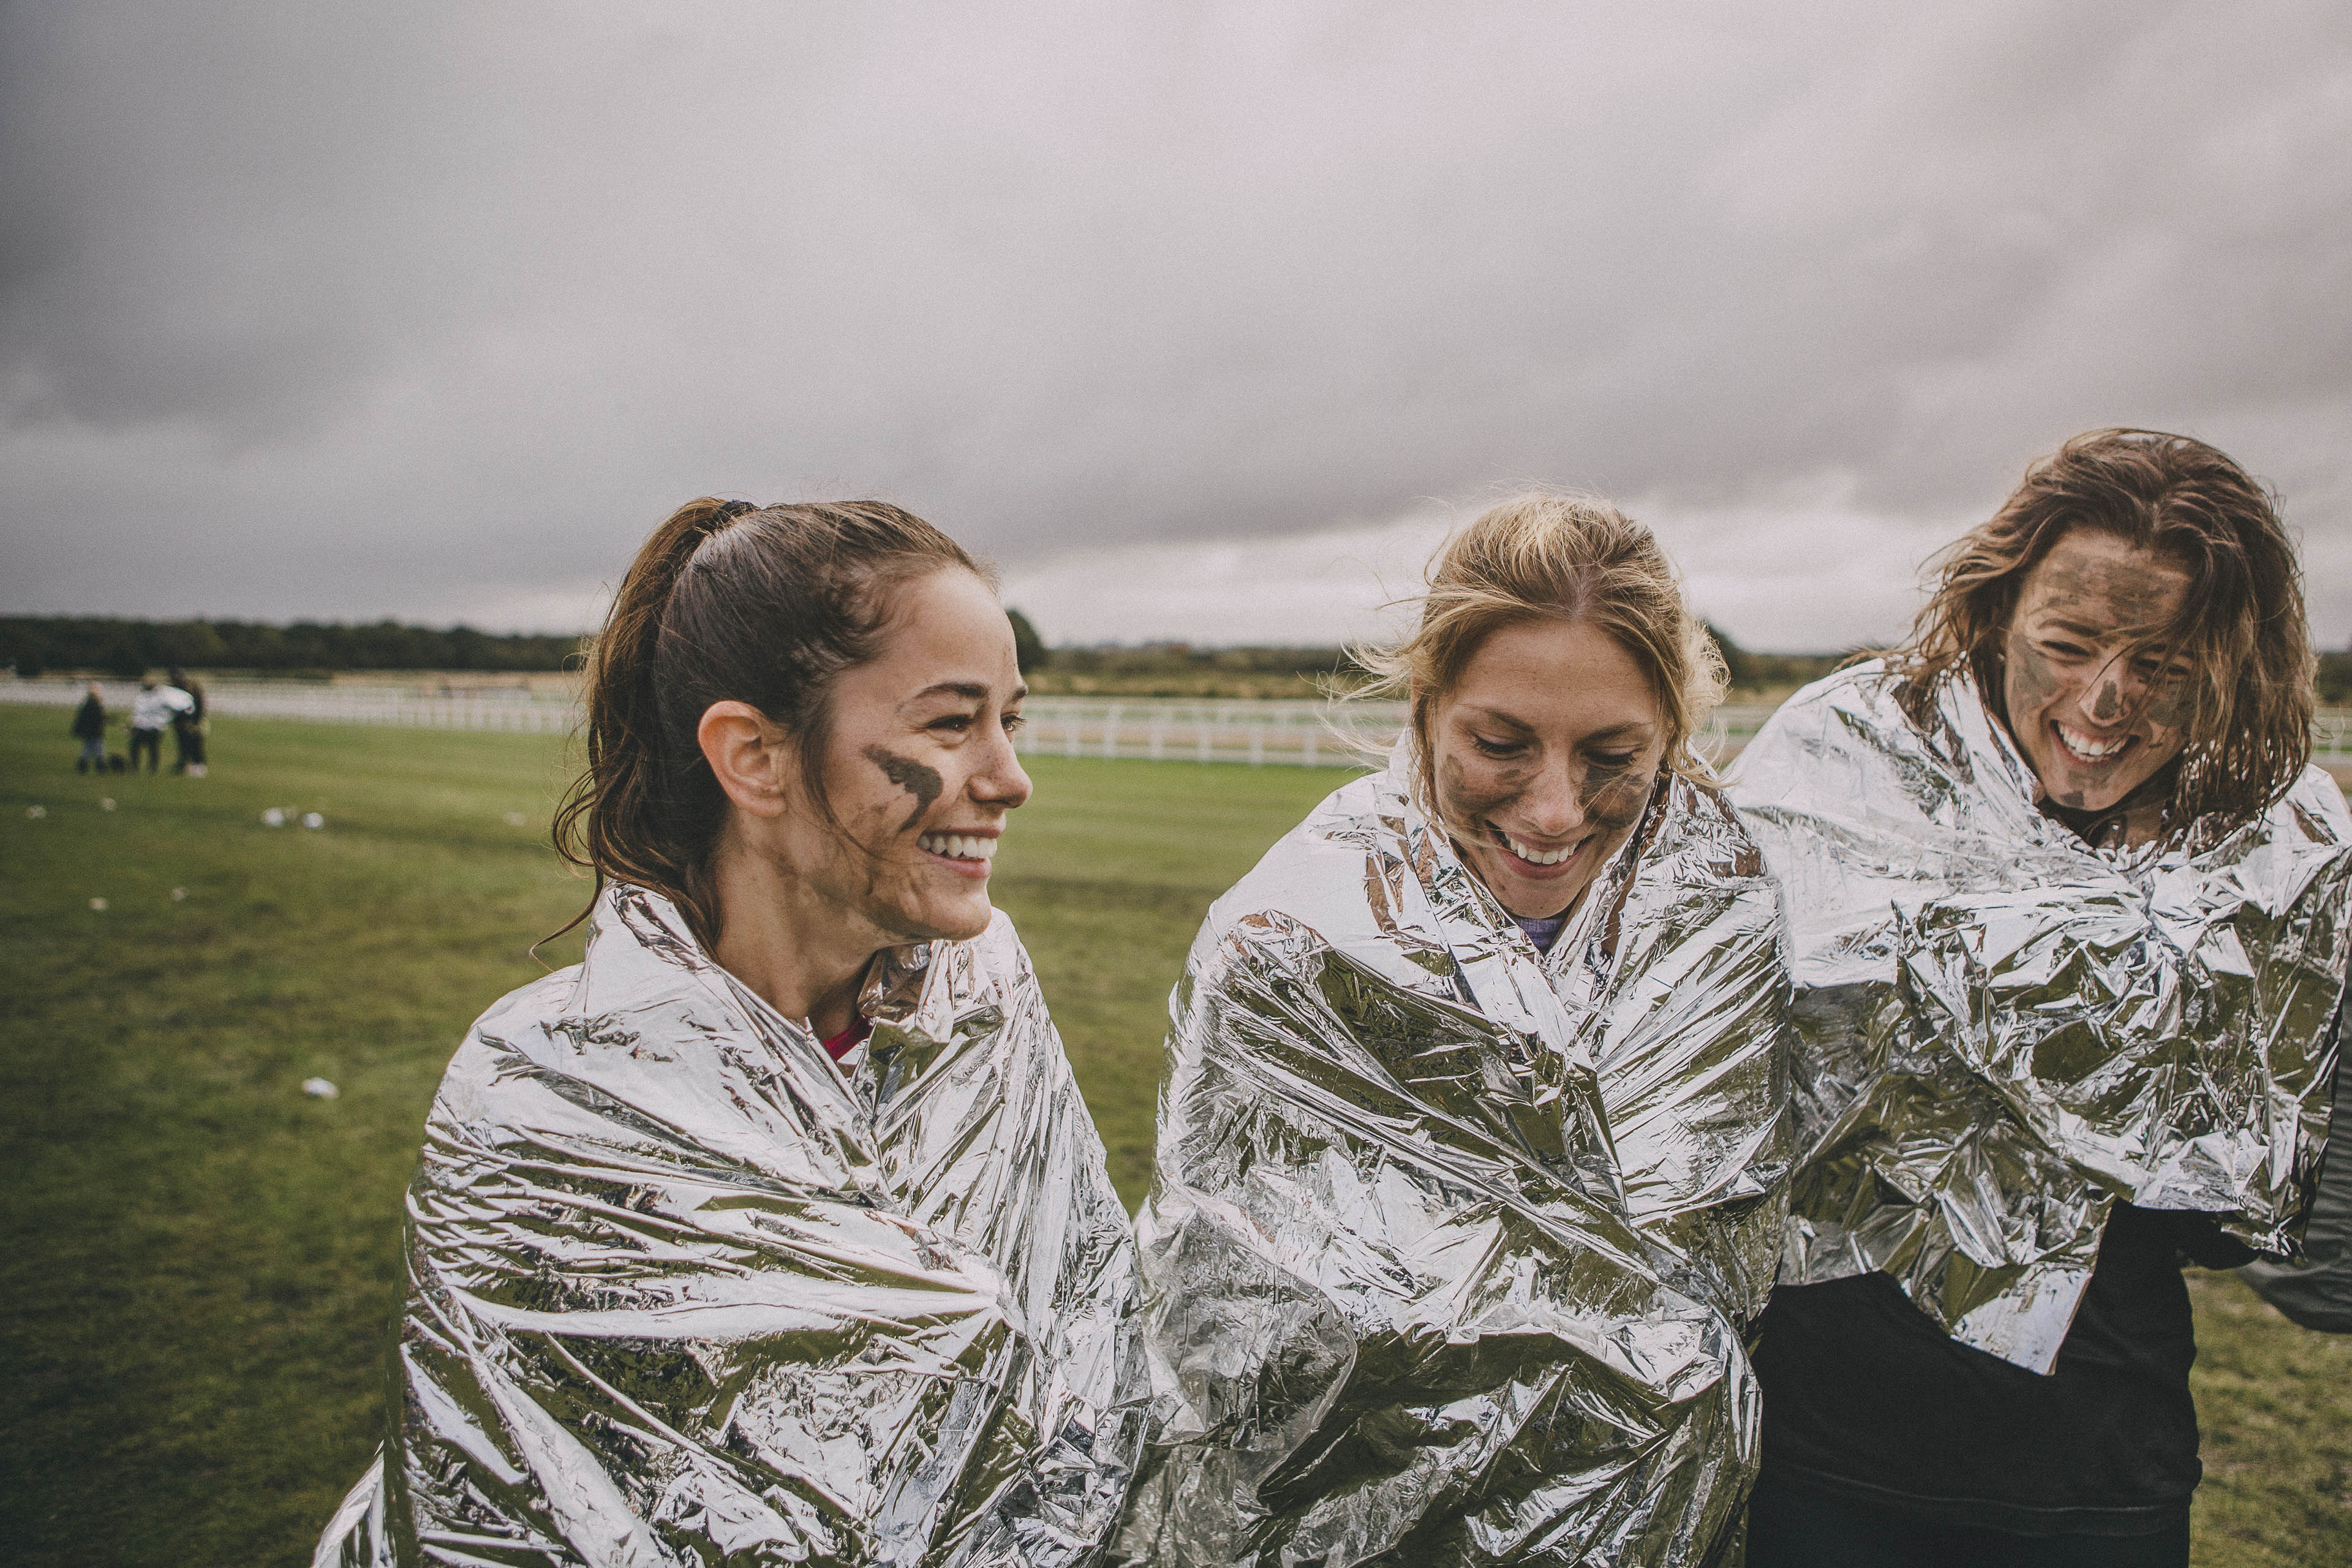 Woman keeping warm with thermal foil blankets after race